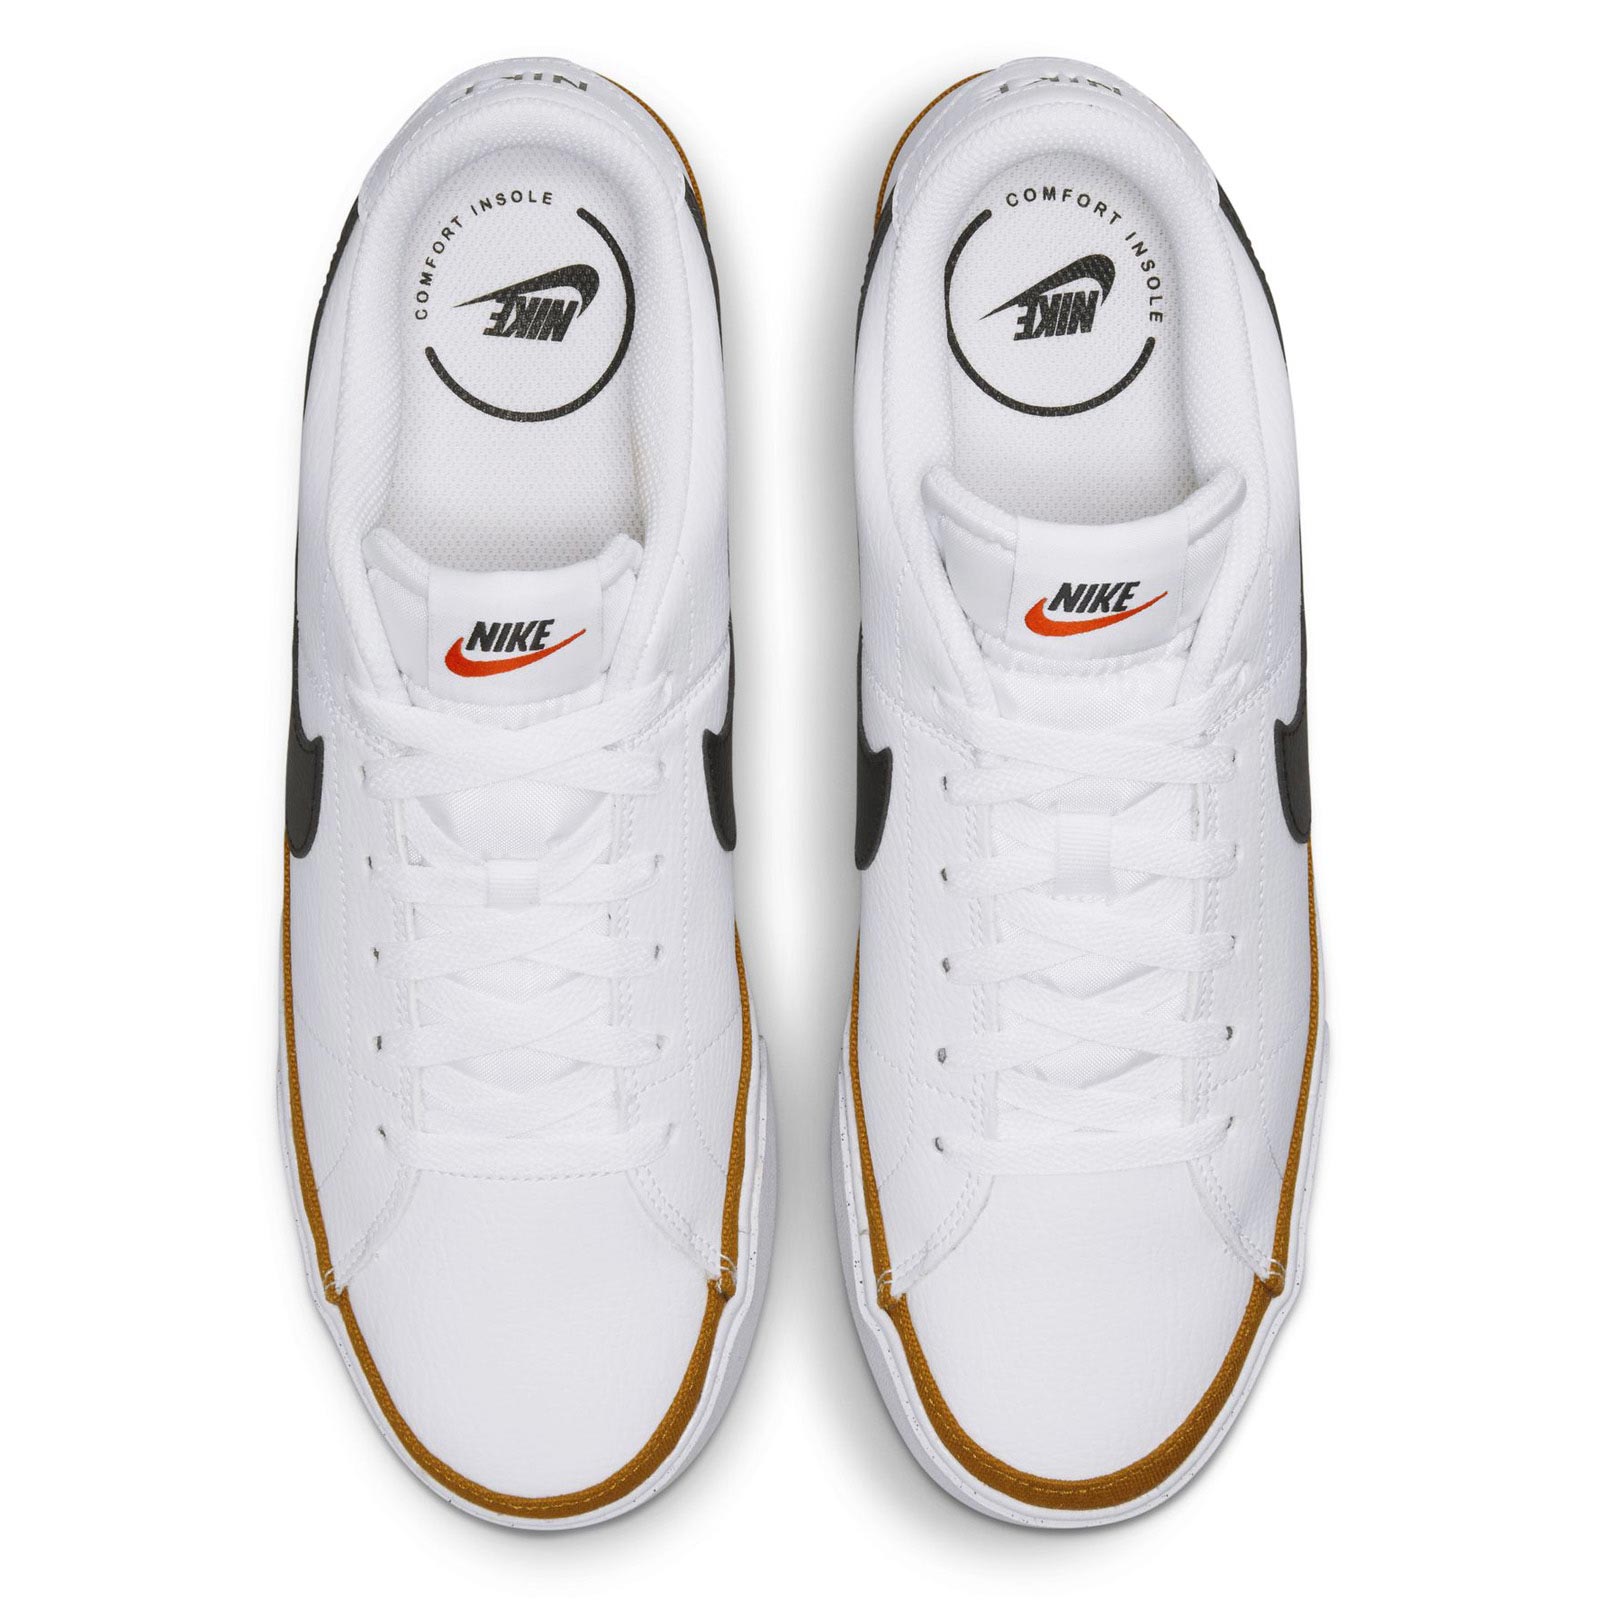 NIKE COURT LEGACY MENS SHOES